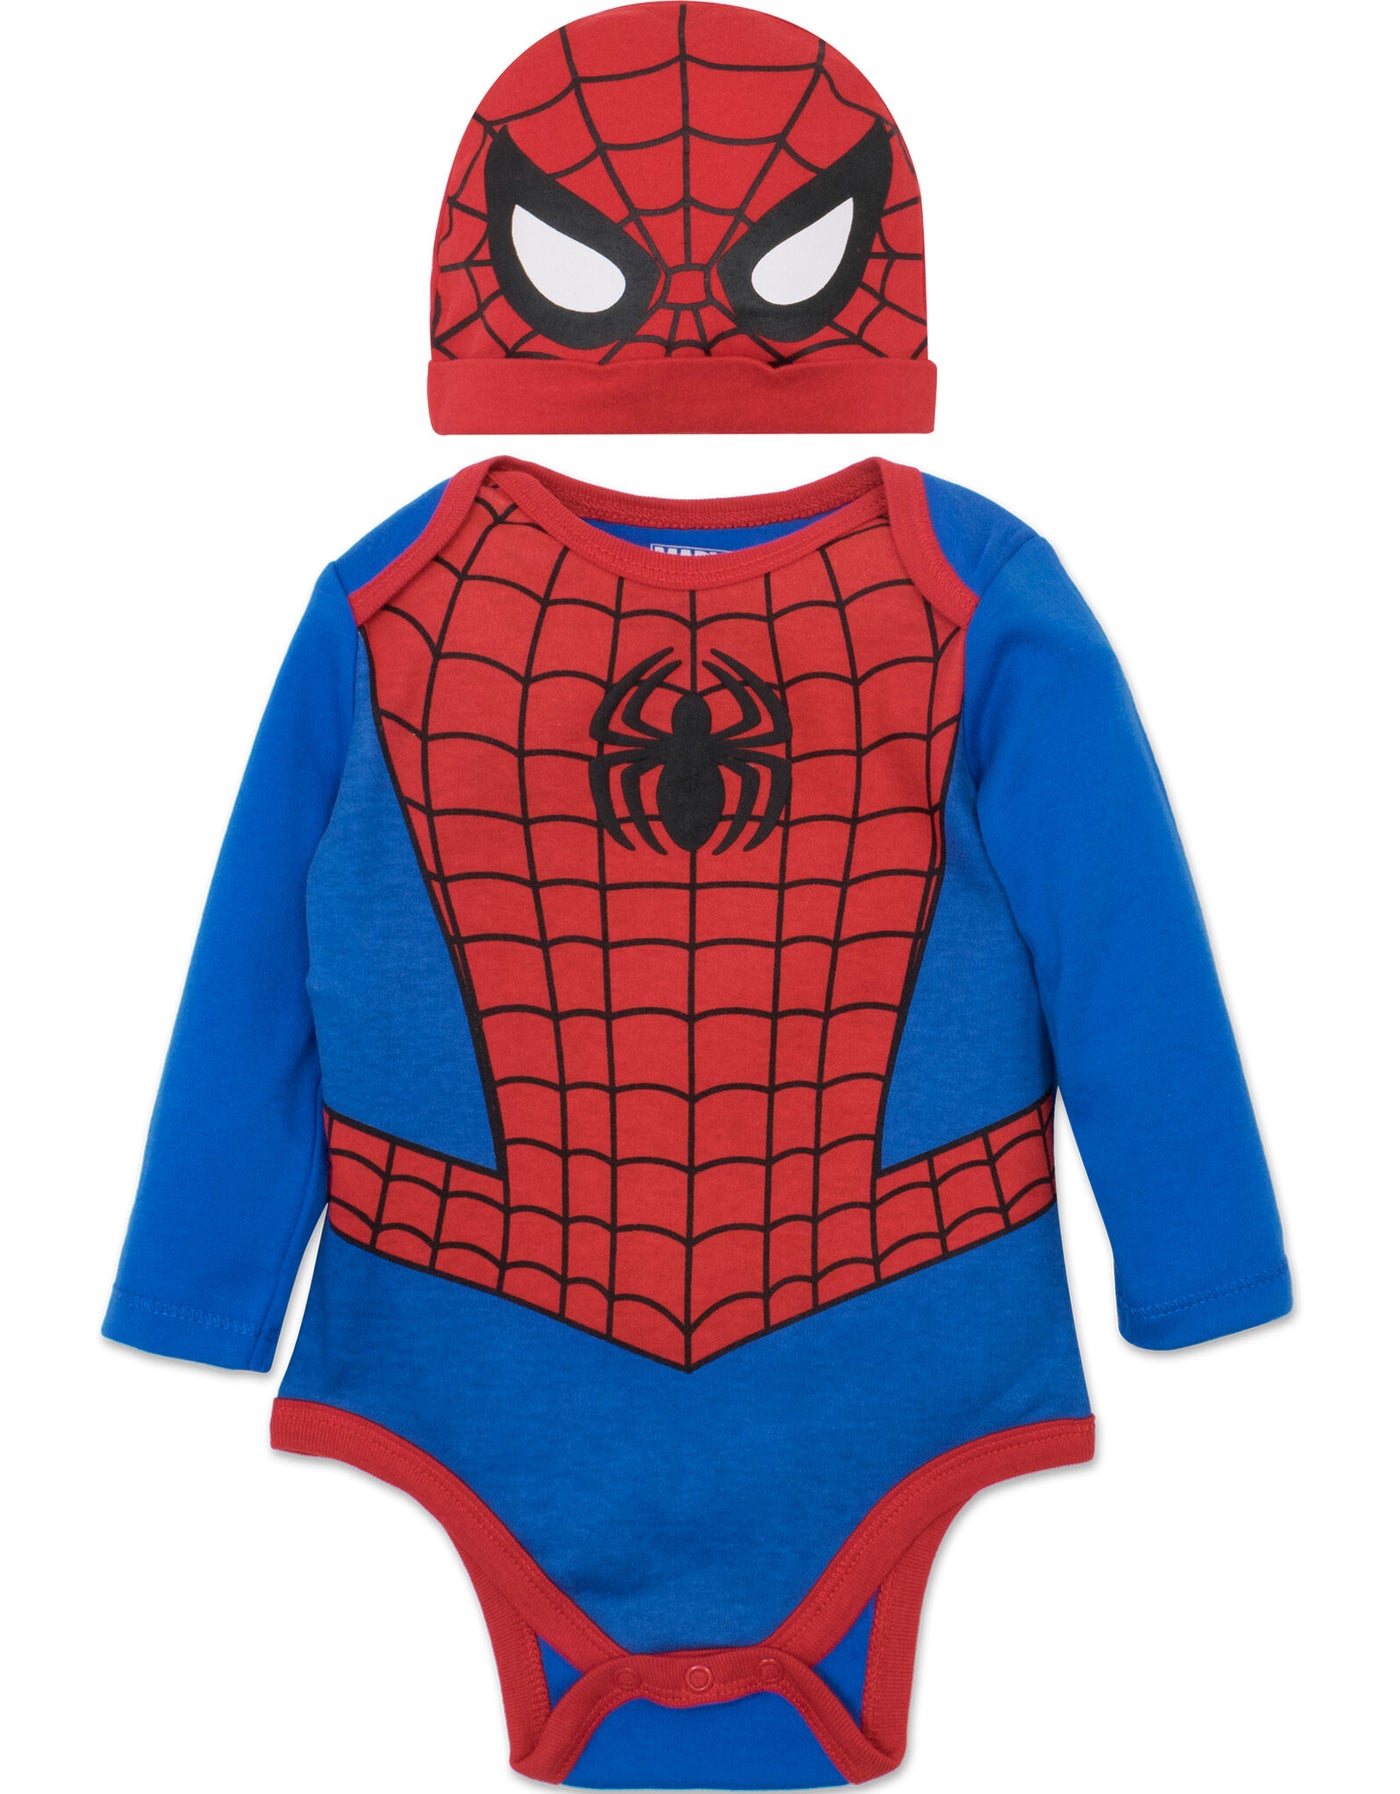 Marvel Avengers Spider-Man Cosplay Bodysuit and Hat